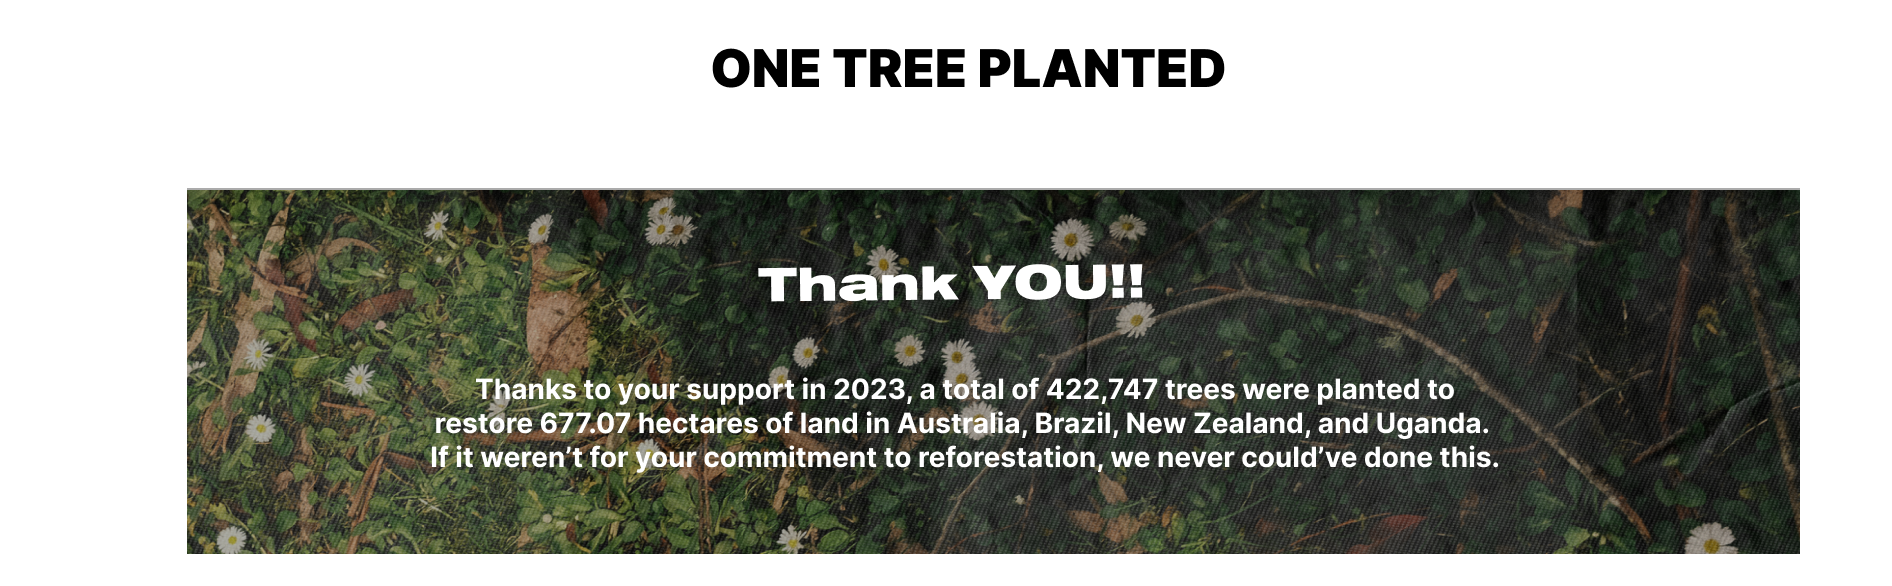 One Tree Planted - Shop to support!